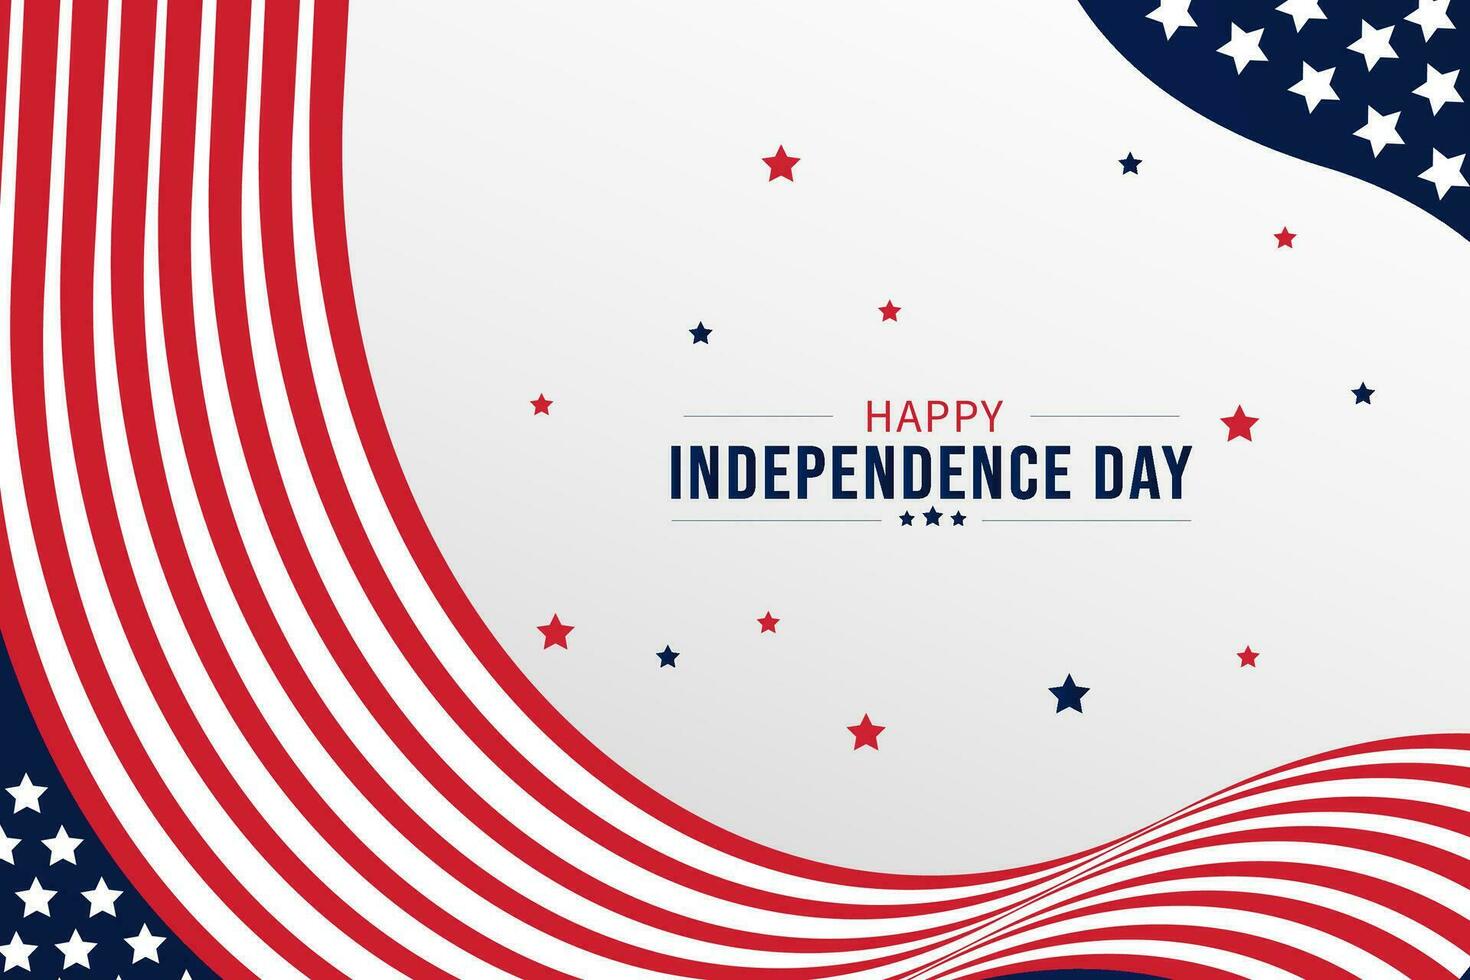 4th of July American independence day background vector